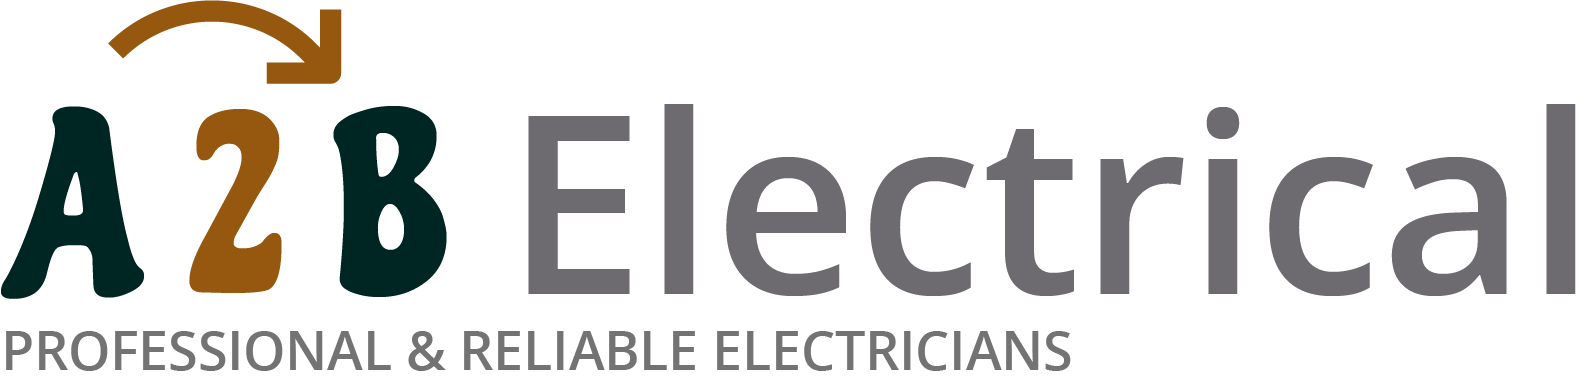 If you have electrical wiring problems in Hertford, we can provide an electrician to have a look for you. 